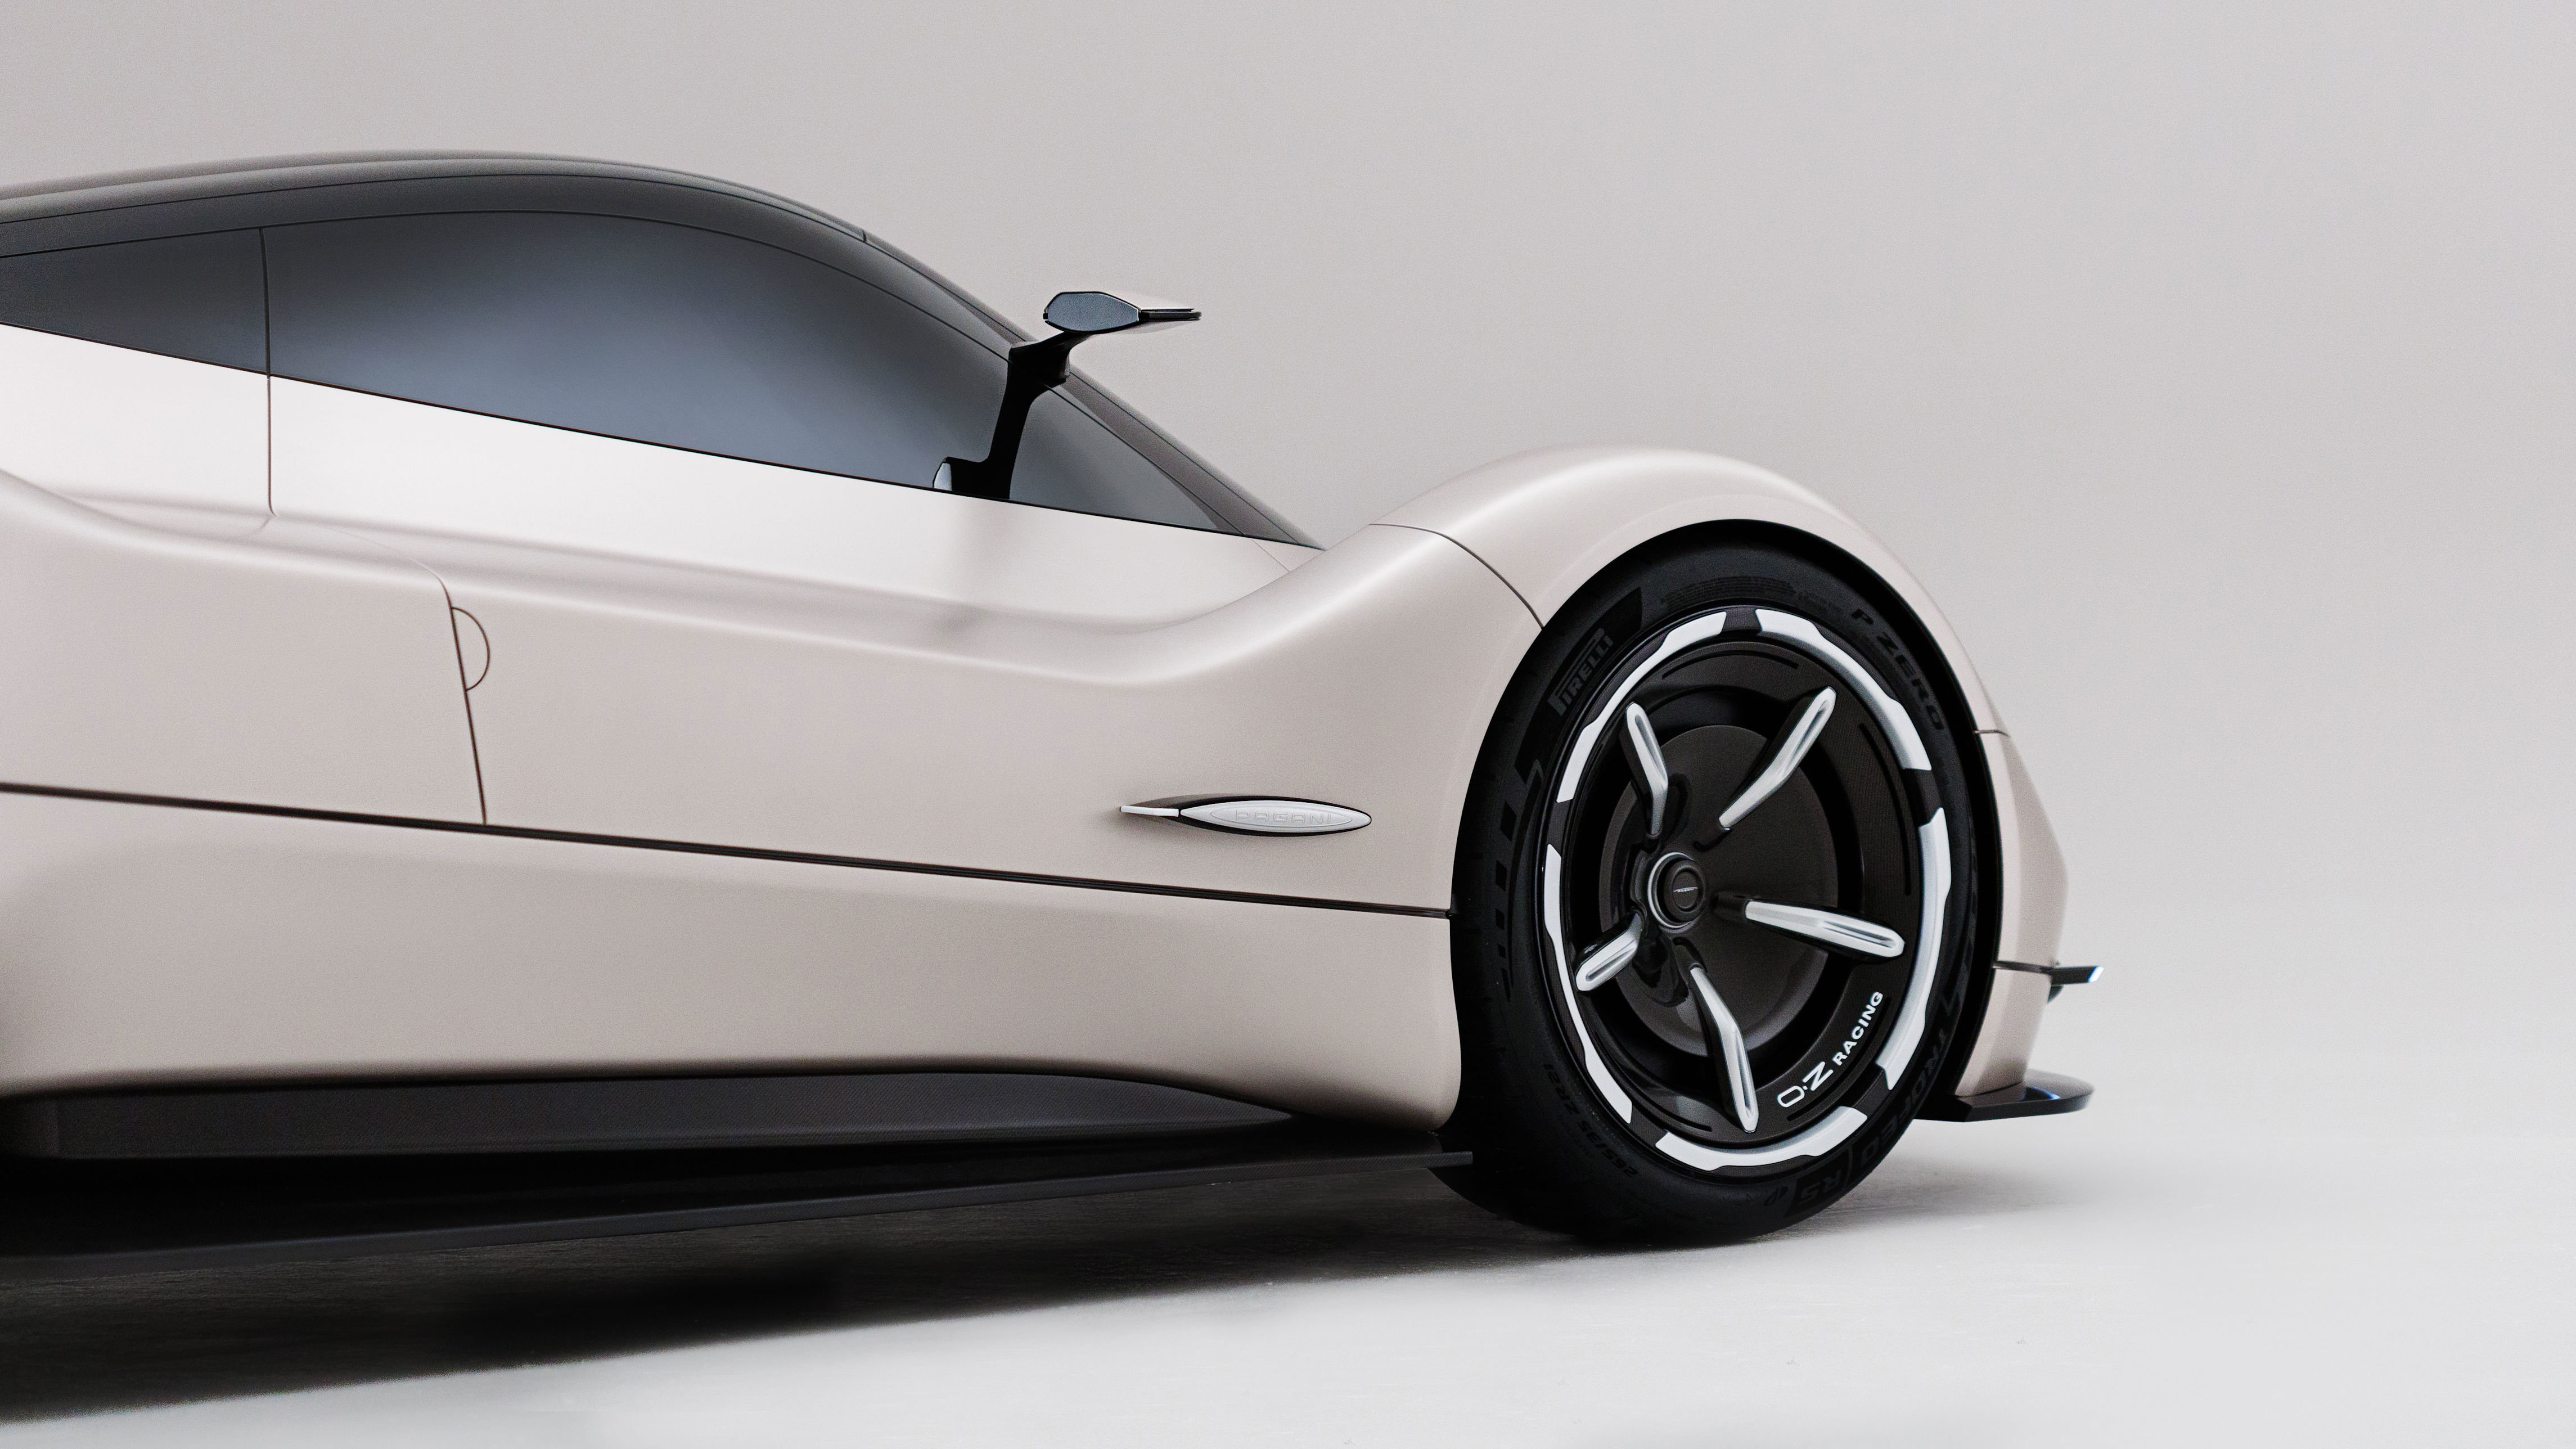 behold: the concept ‘alisea’, a wonderfully reimagined pagani zonda